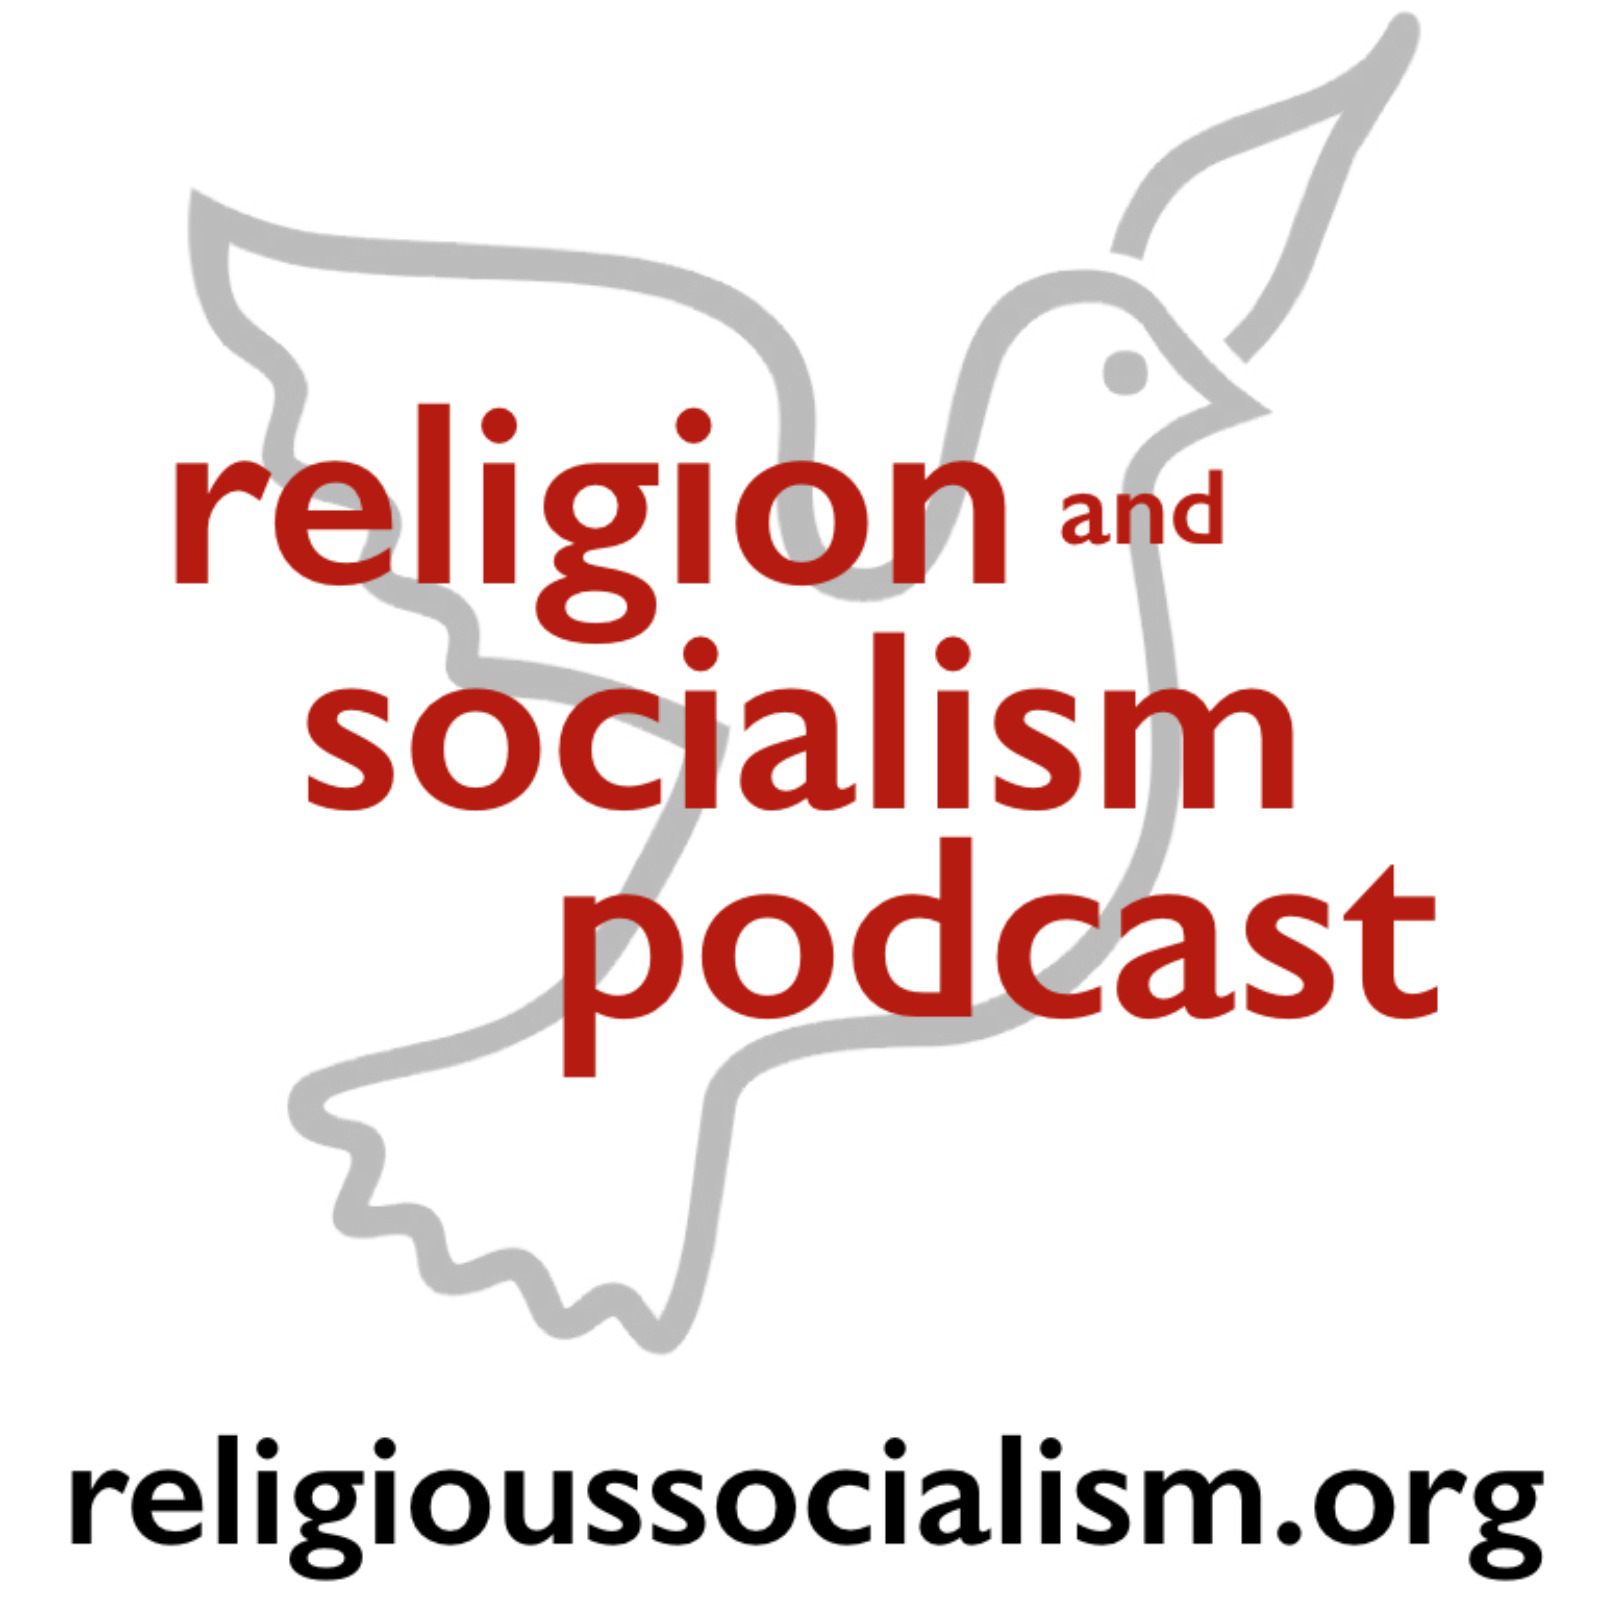 The Religion and Socialism Podcast